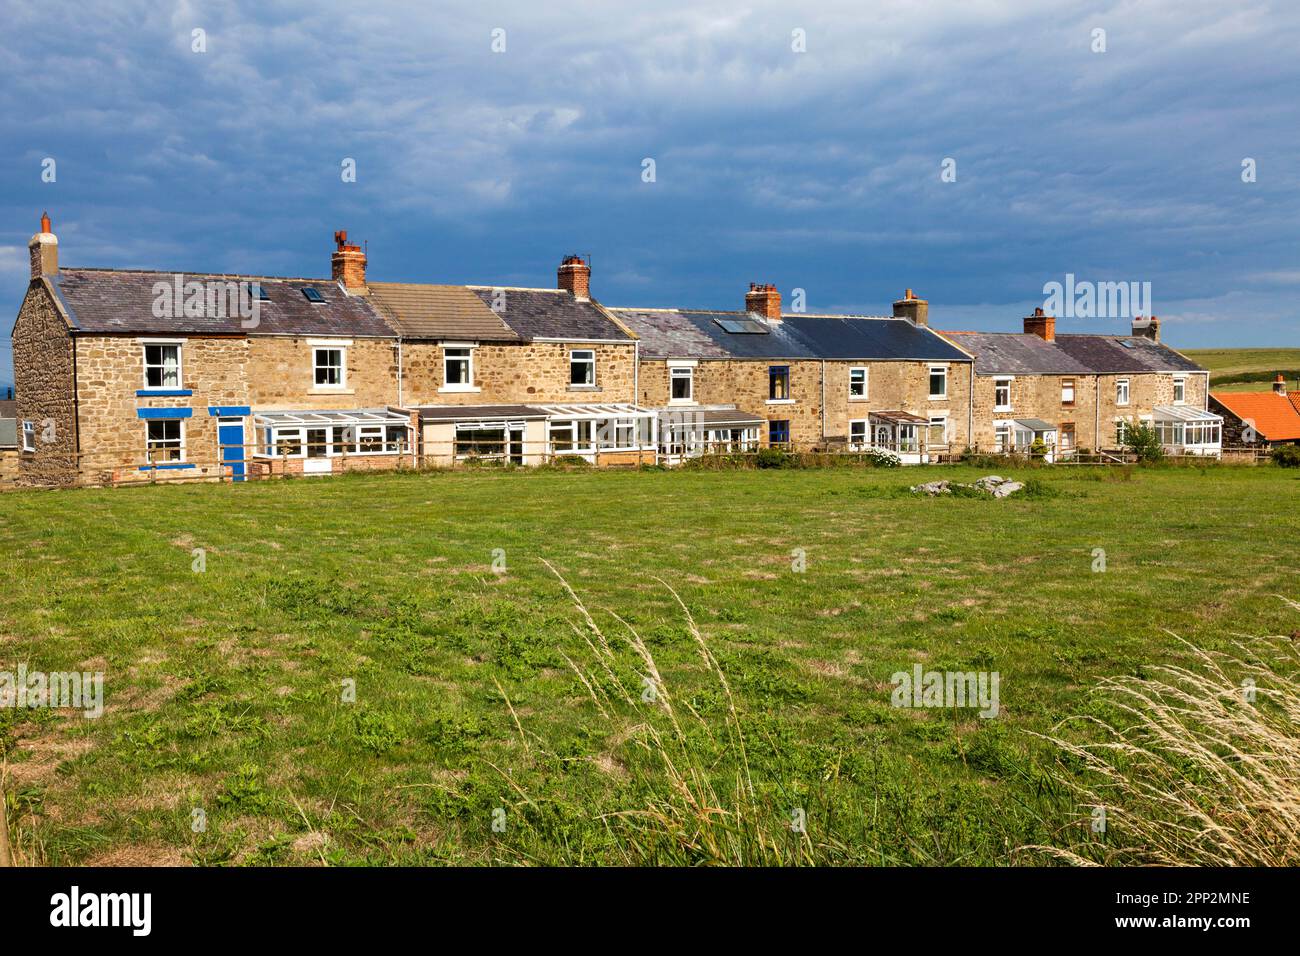 Rural cottages overlooking agricultural land in the U.K. Stock Photo